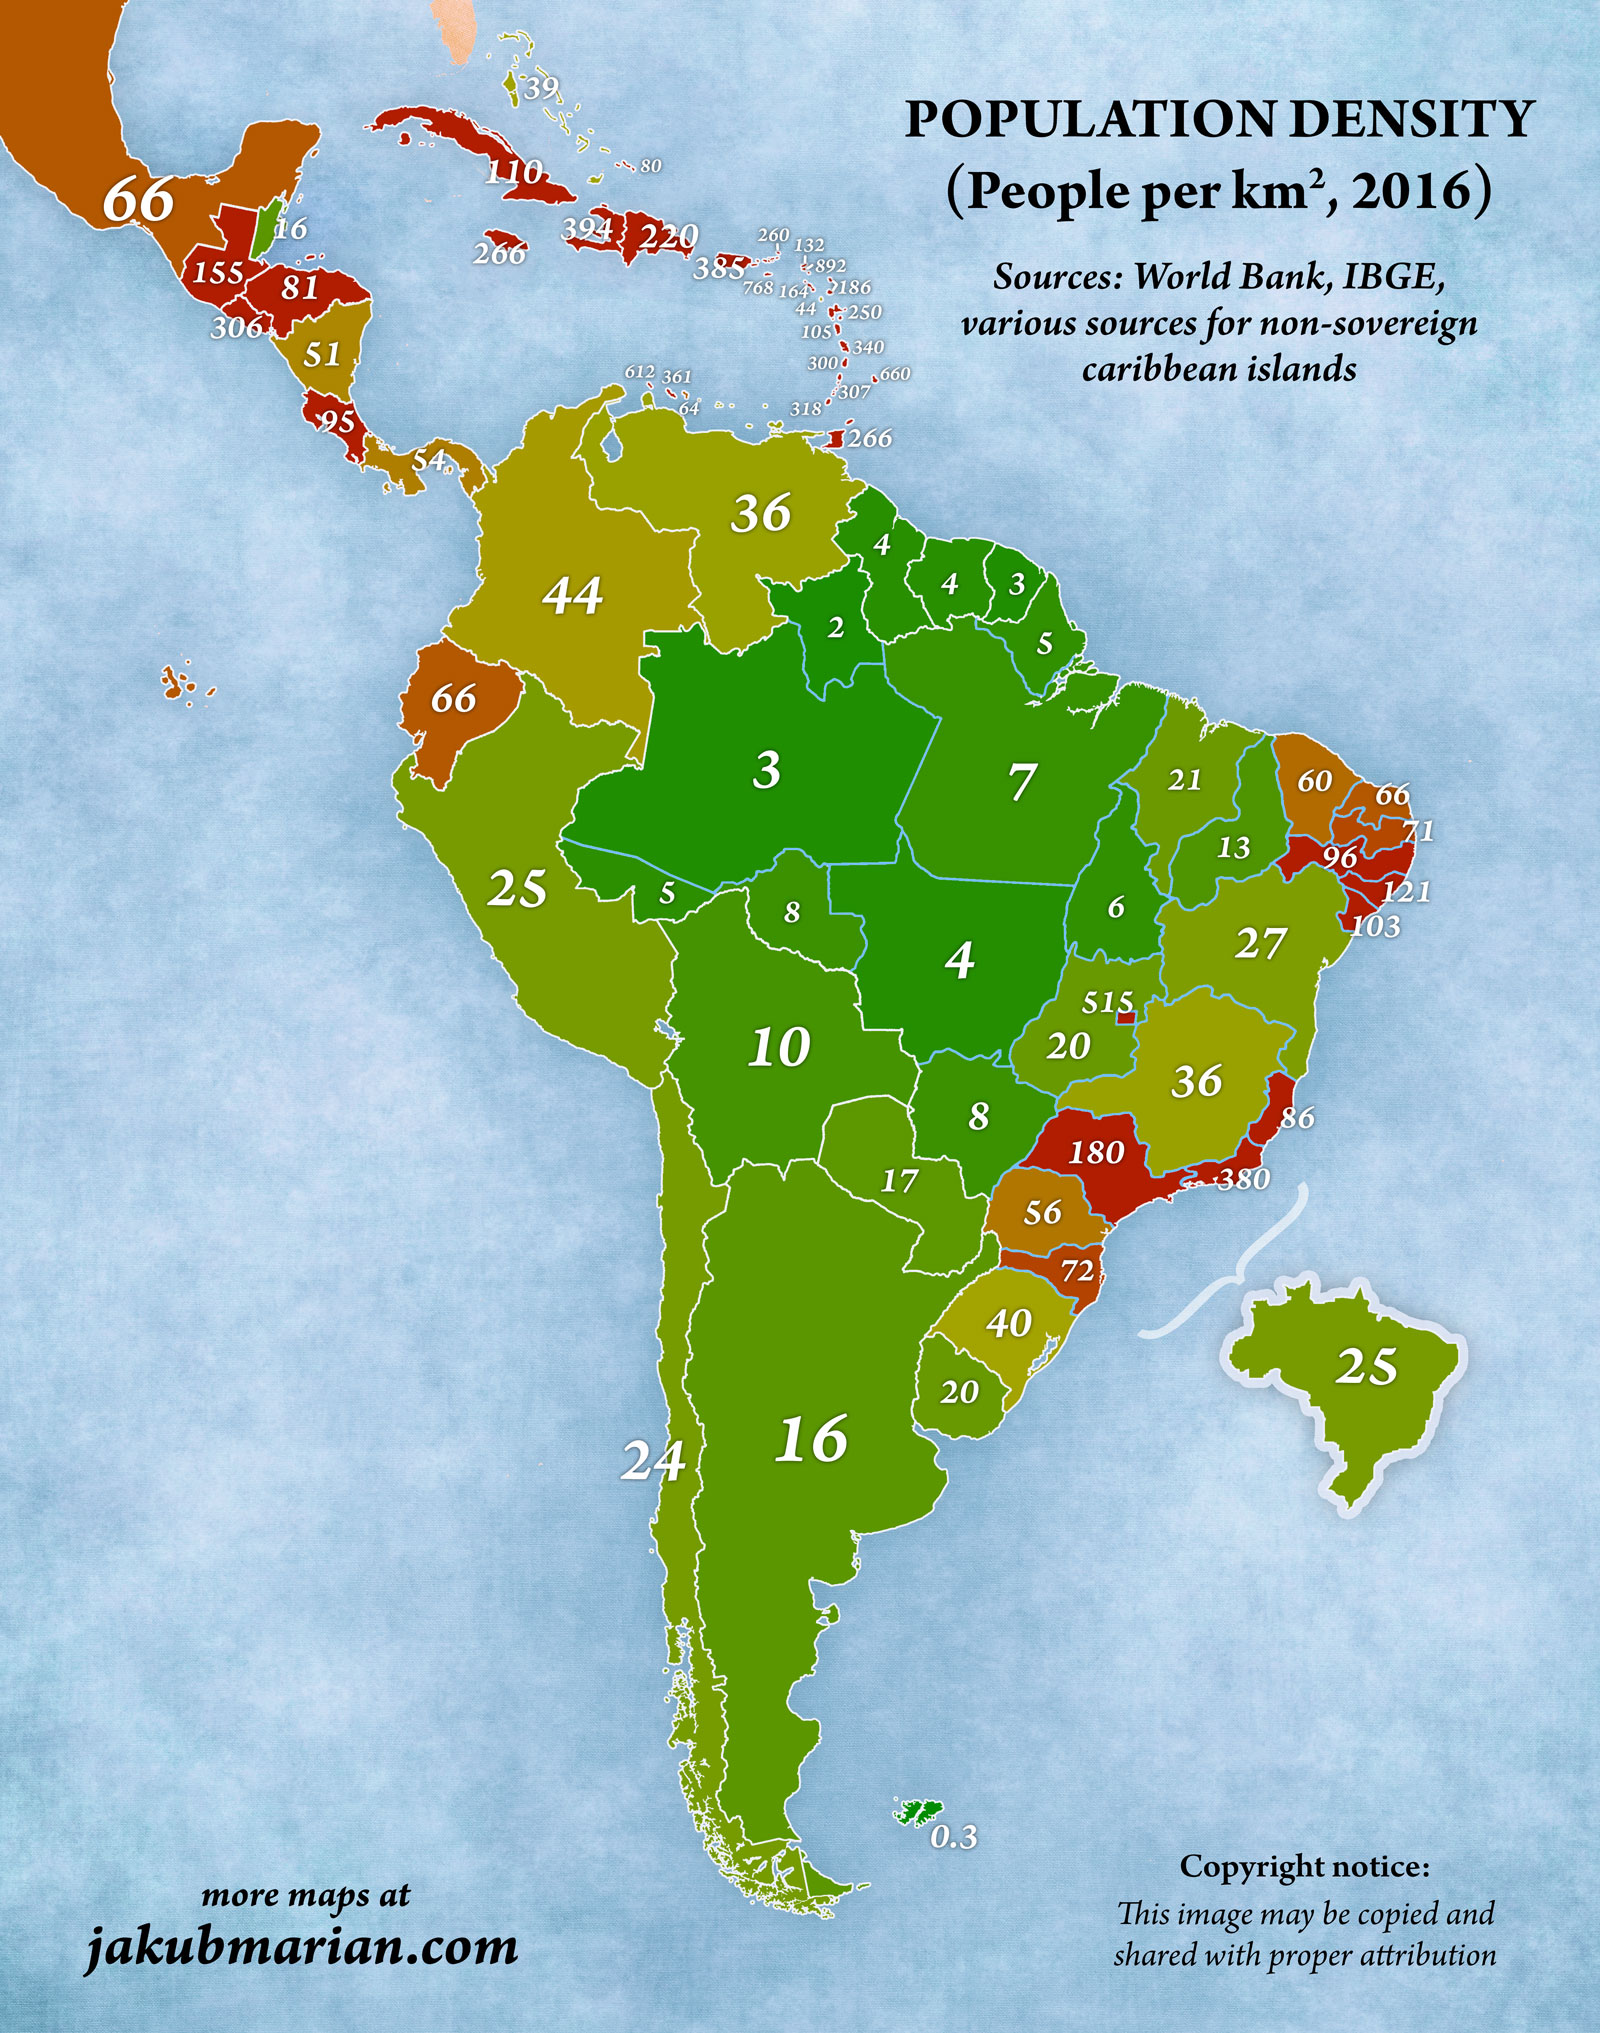 Population density in South and Central America